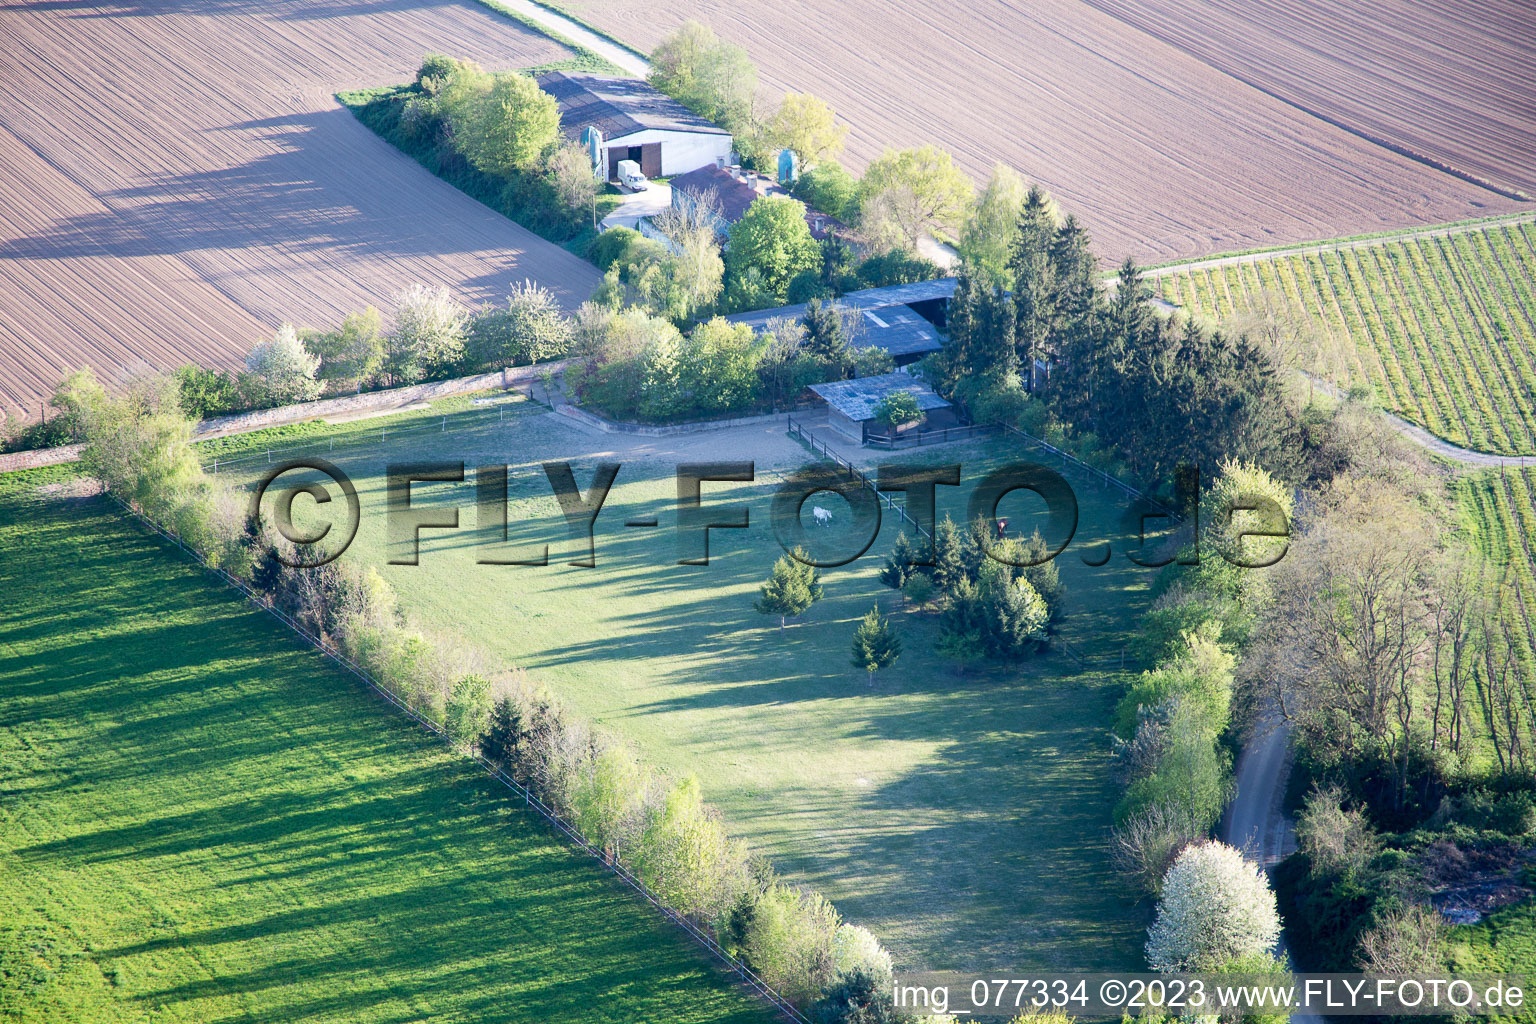 Aerial view of Trakehner paddock in Minfeld in the state Rhineland-Palatinate, Germany